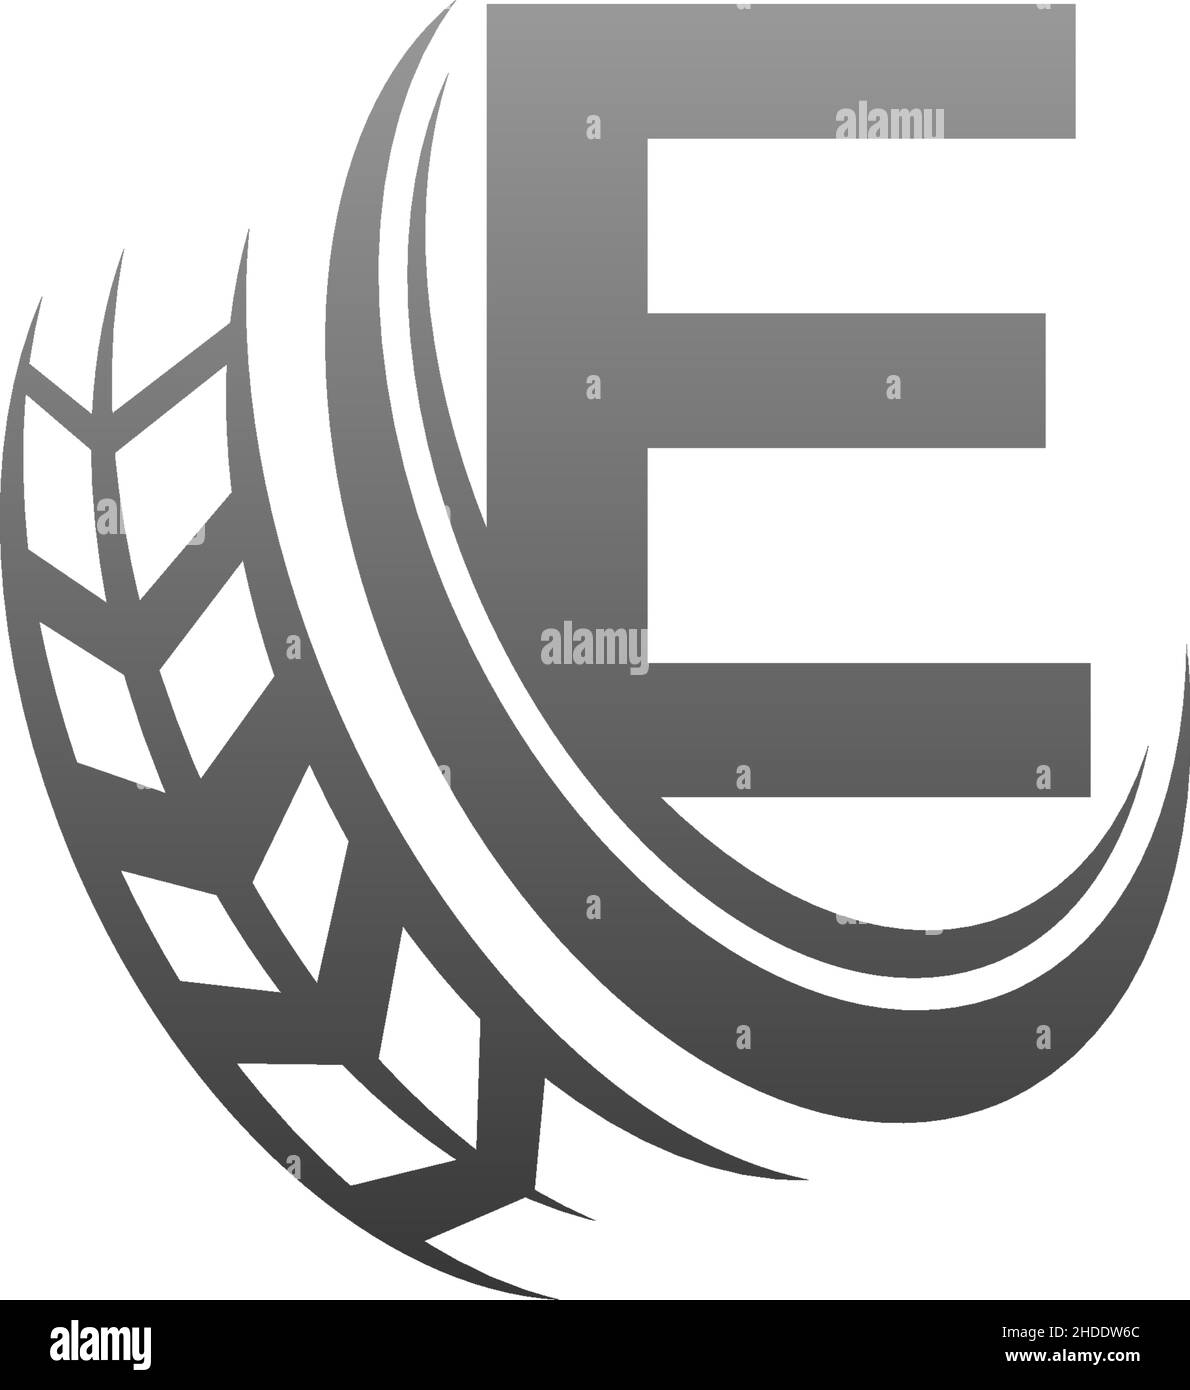 Letter E with trailing wheel icon design template illustration vector Stock Vector